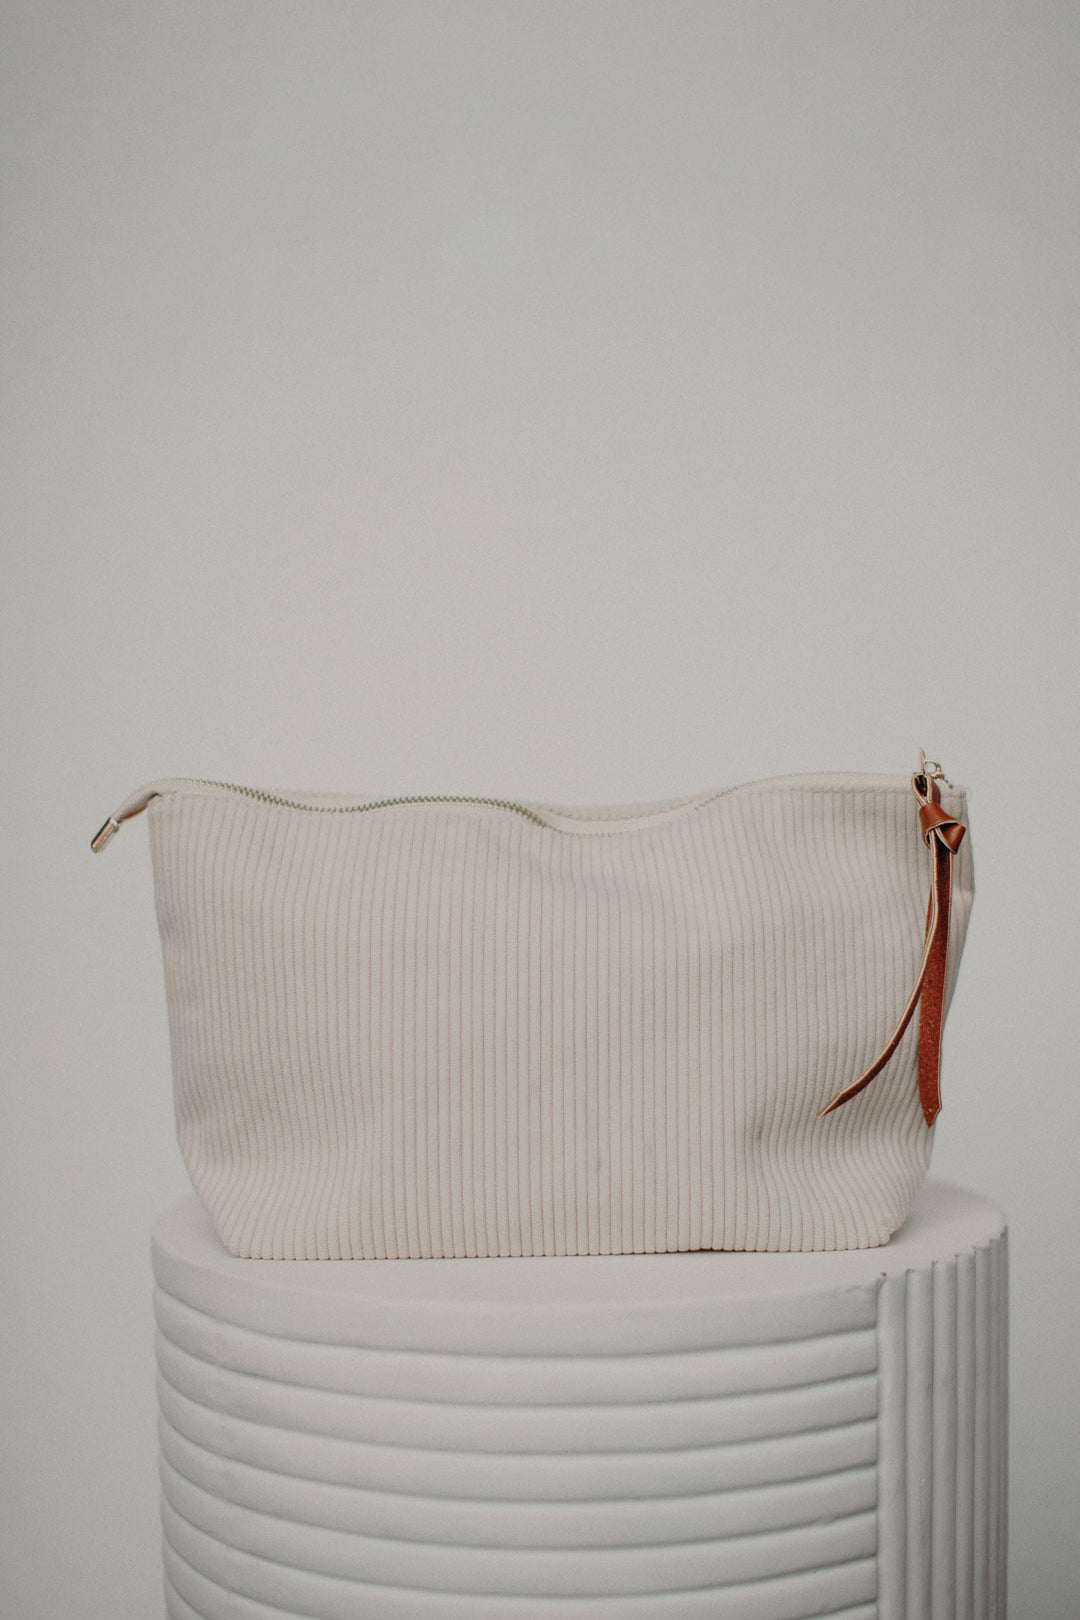 Madre Terra Cosmetic and Travel Bag - Sand